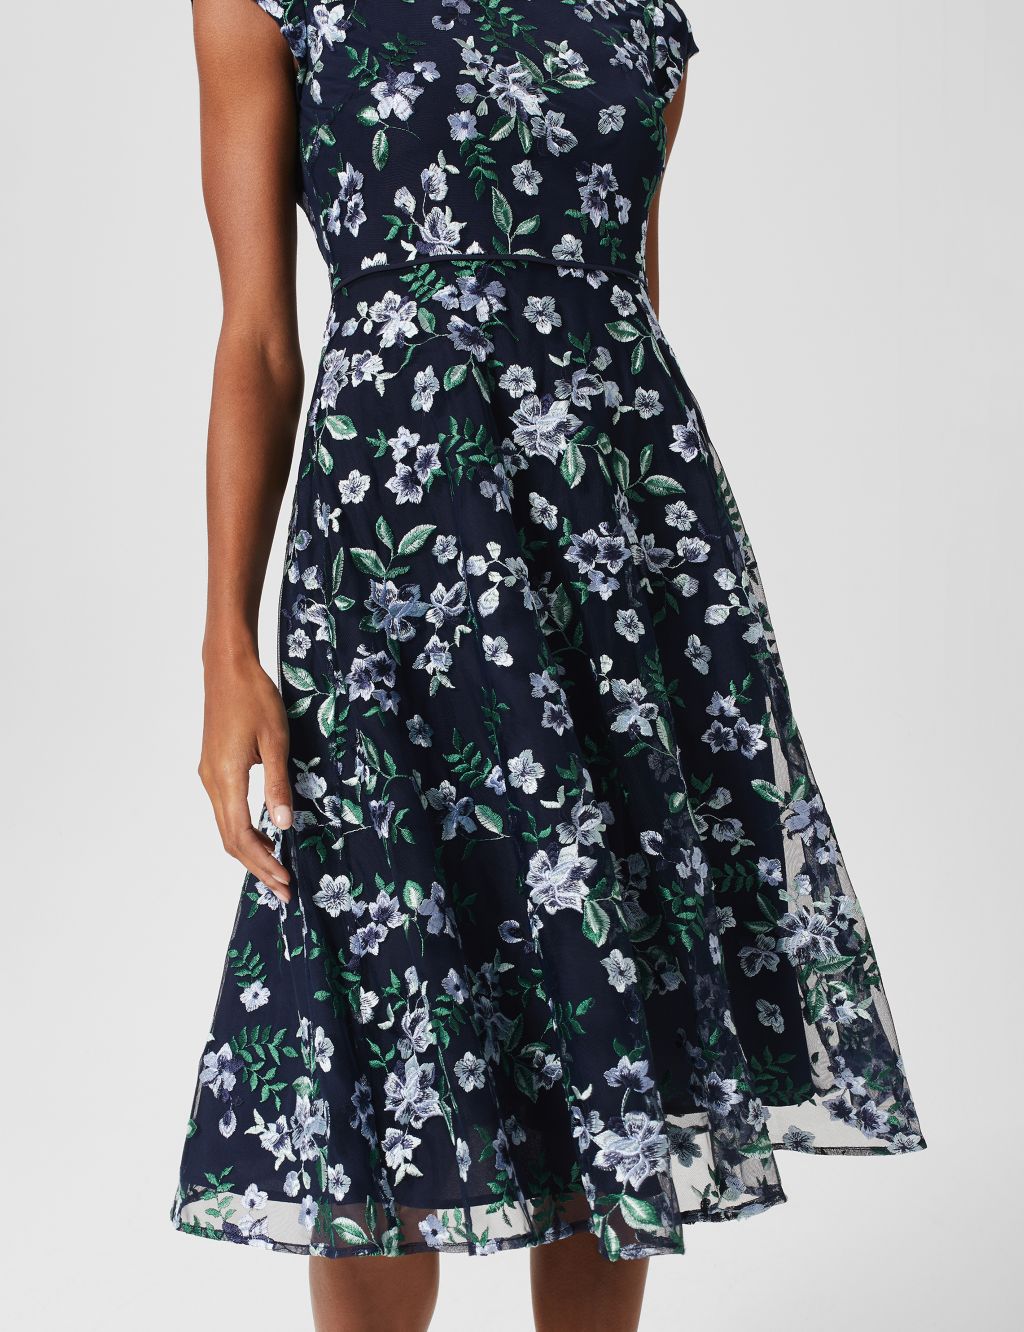 Floral Embroidered Midi Swing Dress image 2